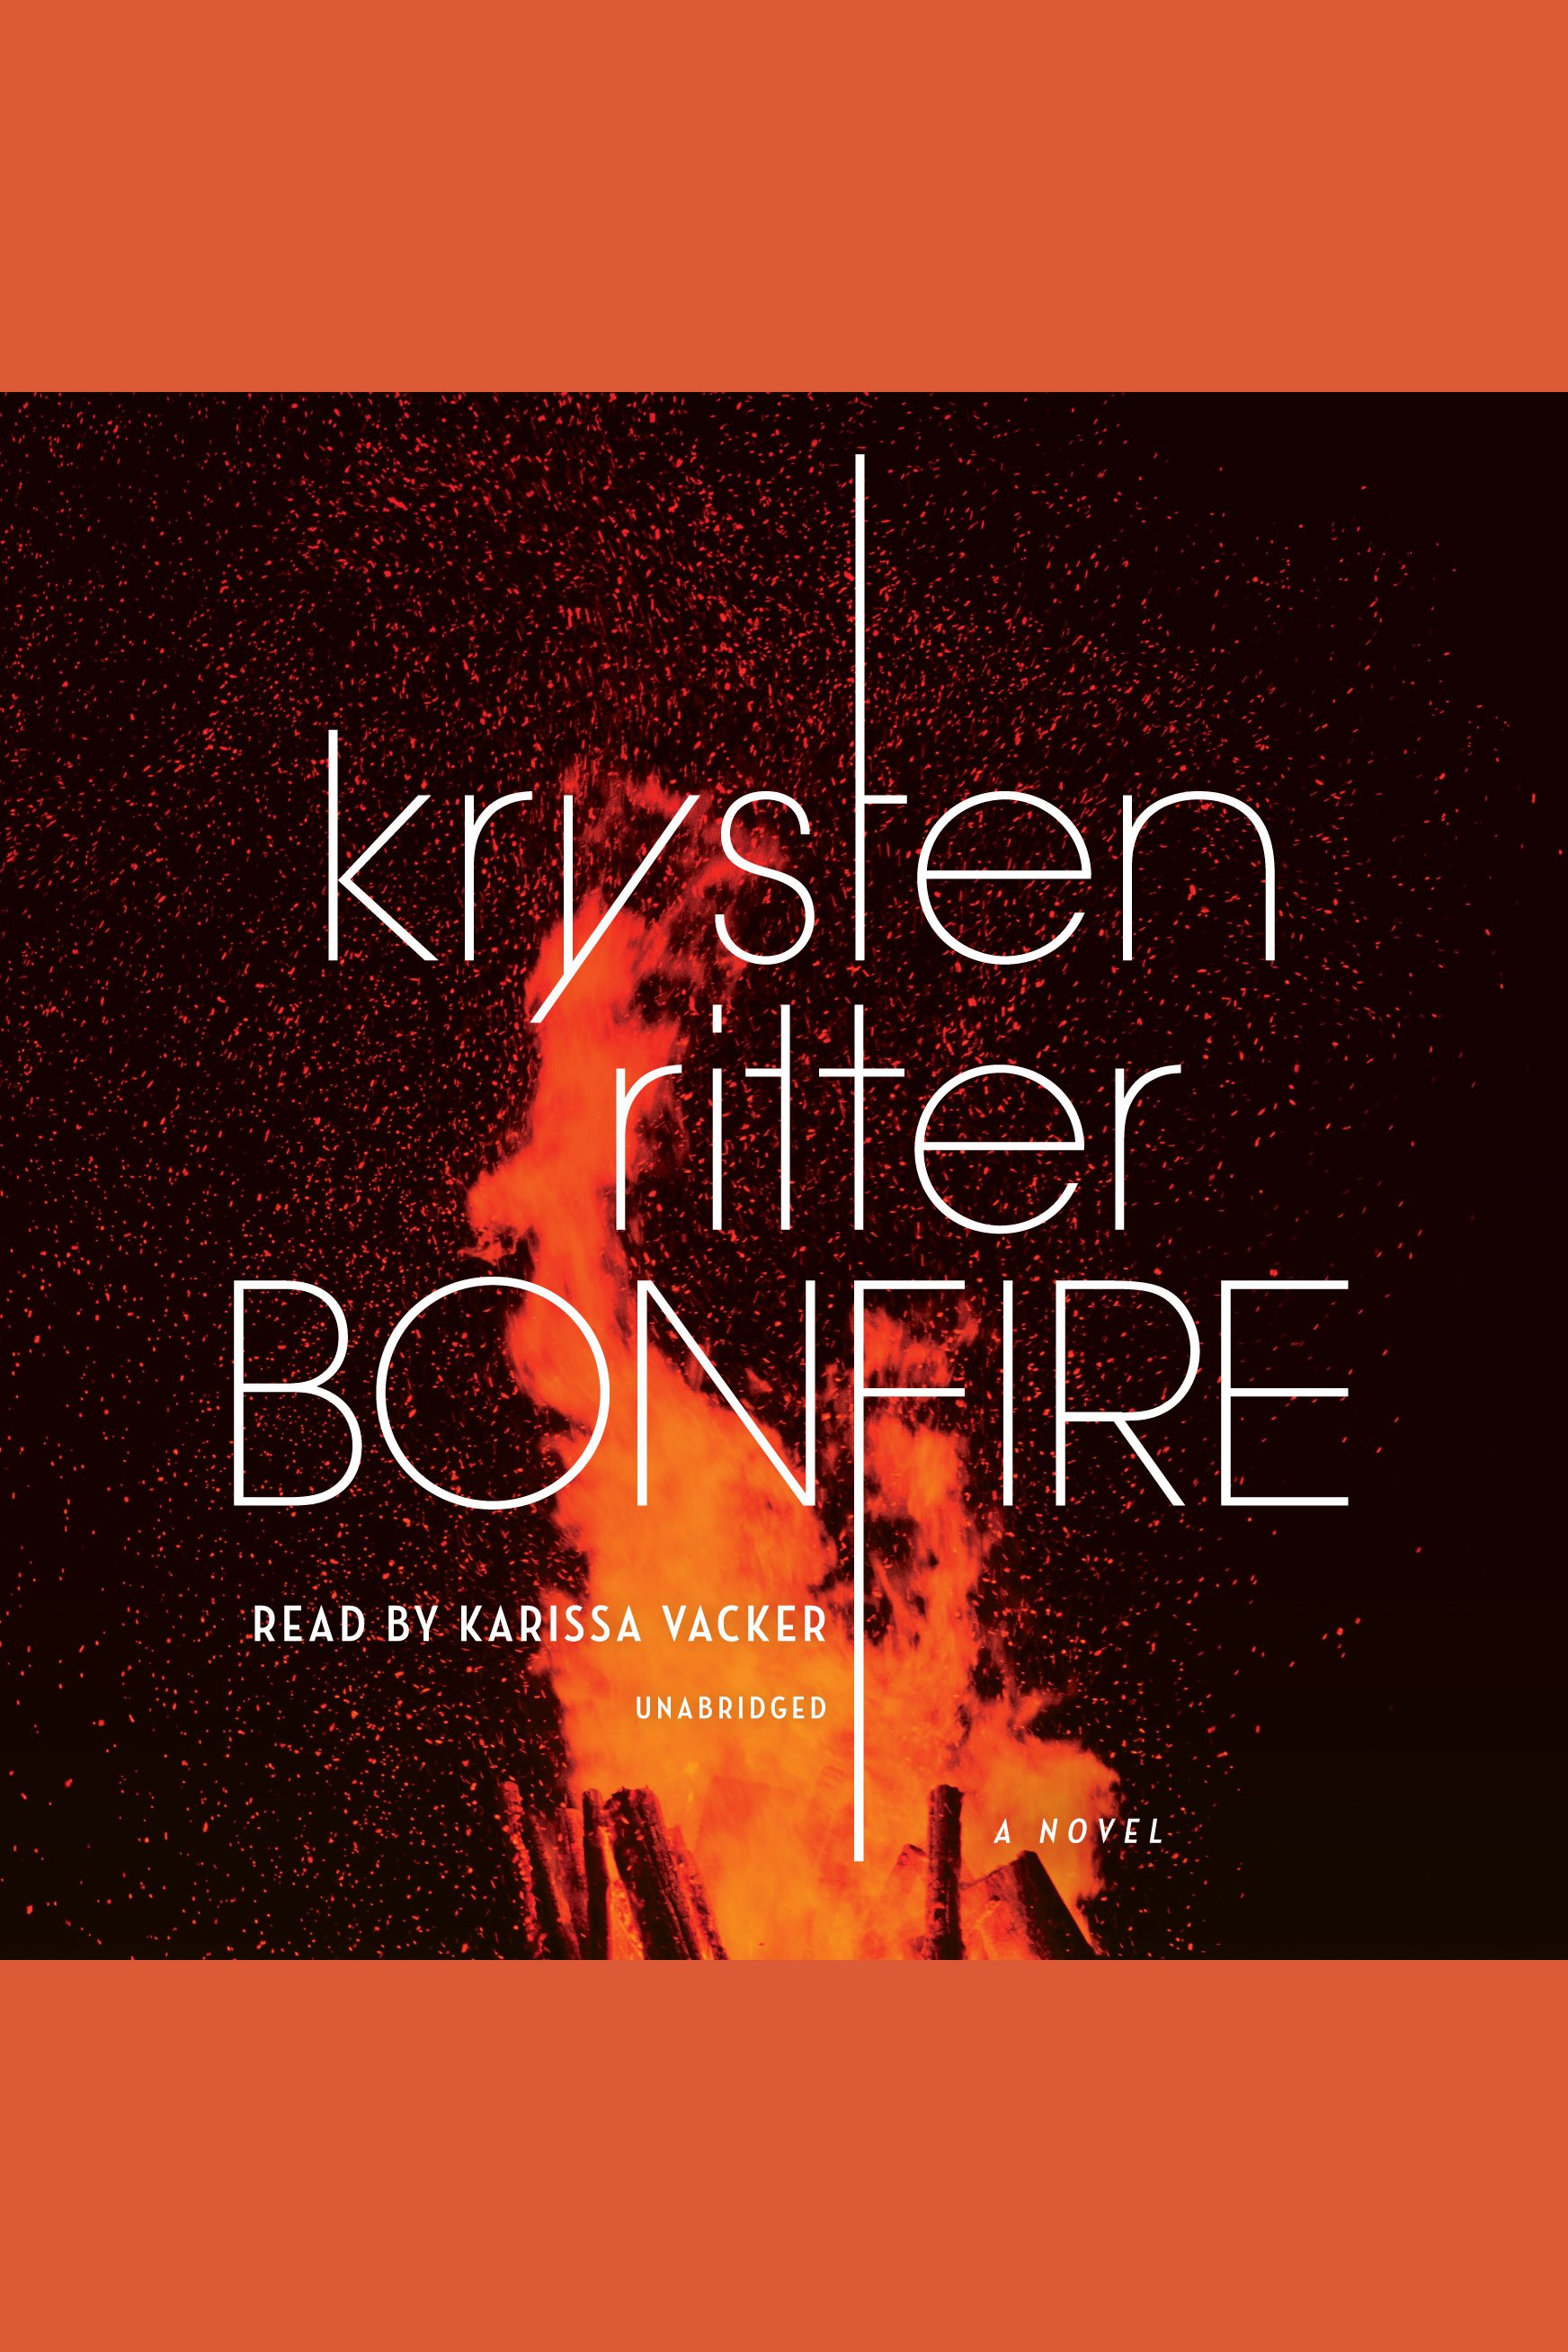 Cover image for Bonfire [electronic resource] : A Novel